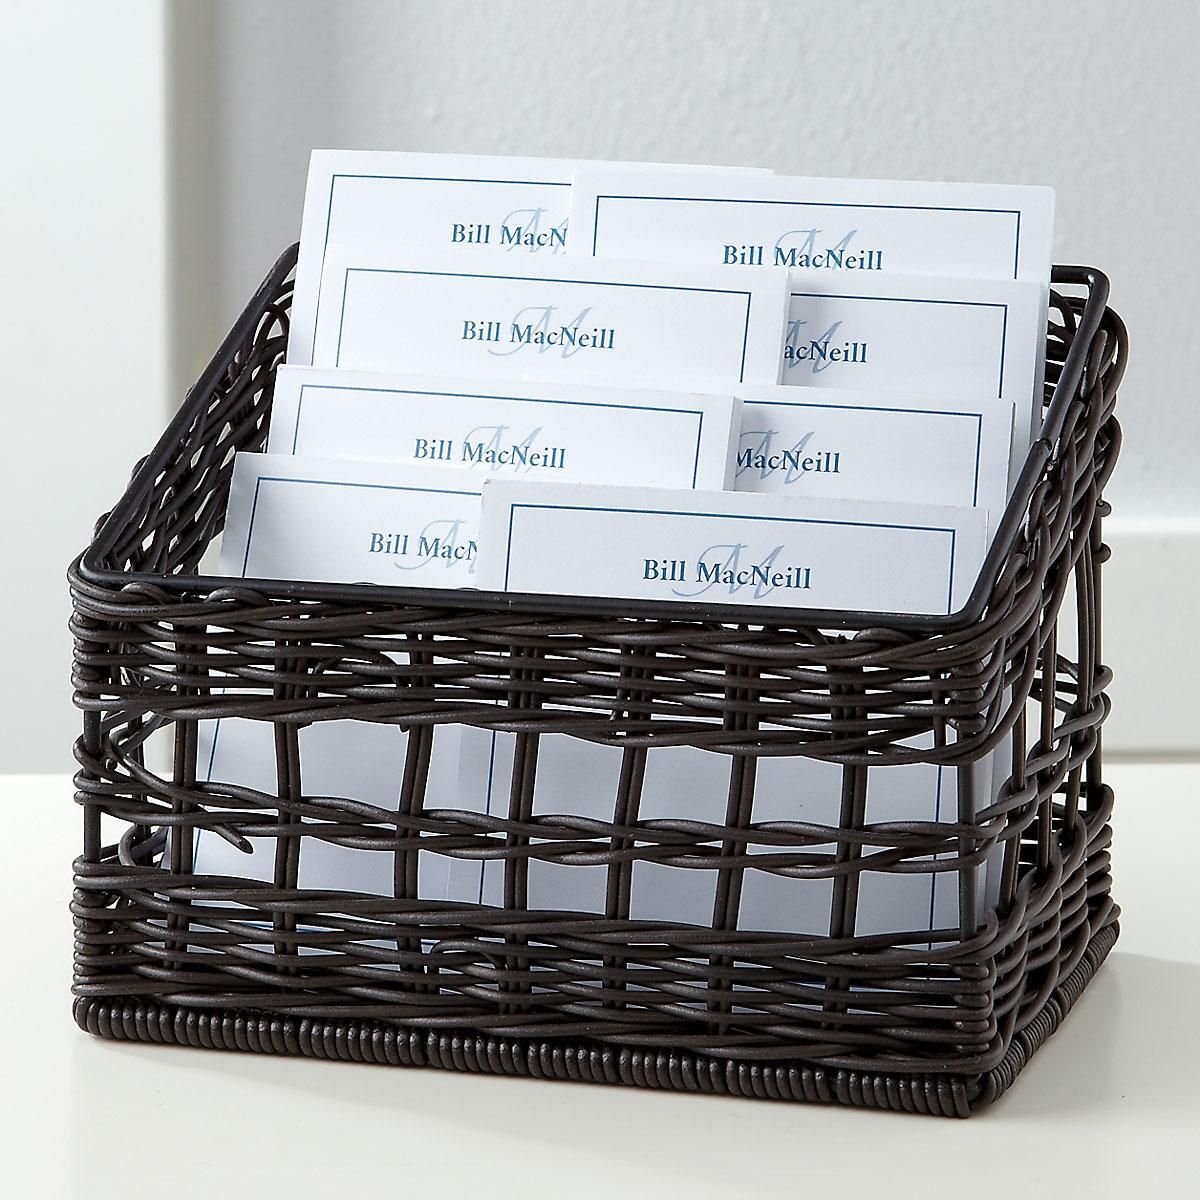 Memo Pad Sets in a Basket | Colorful Images